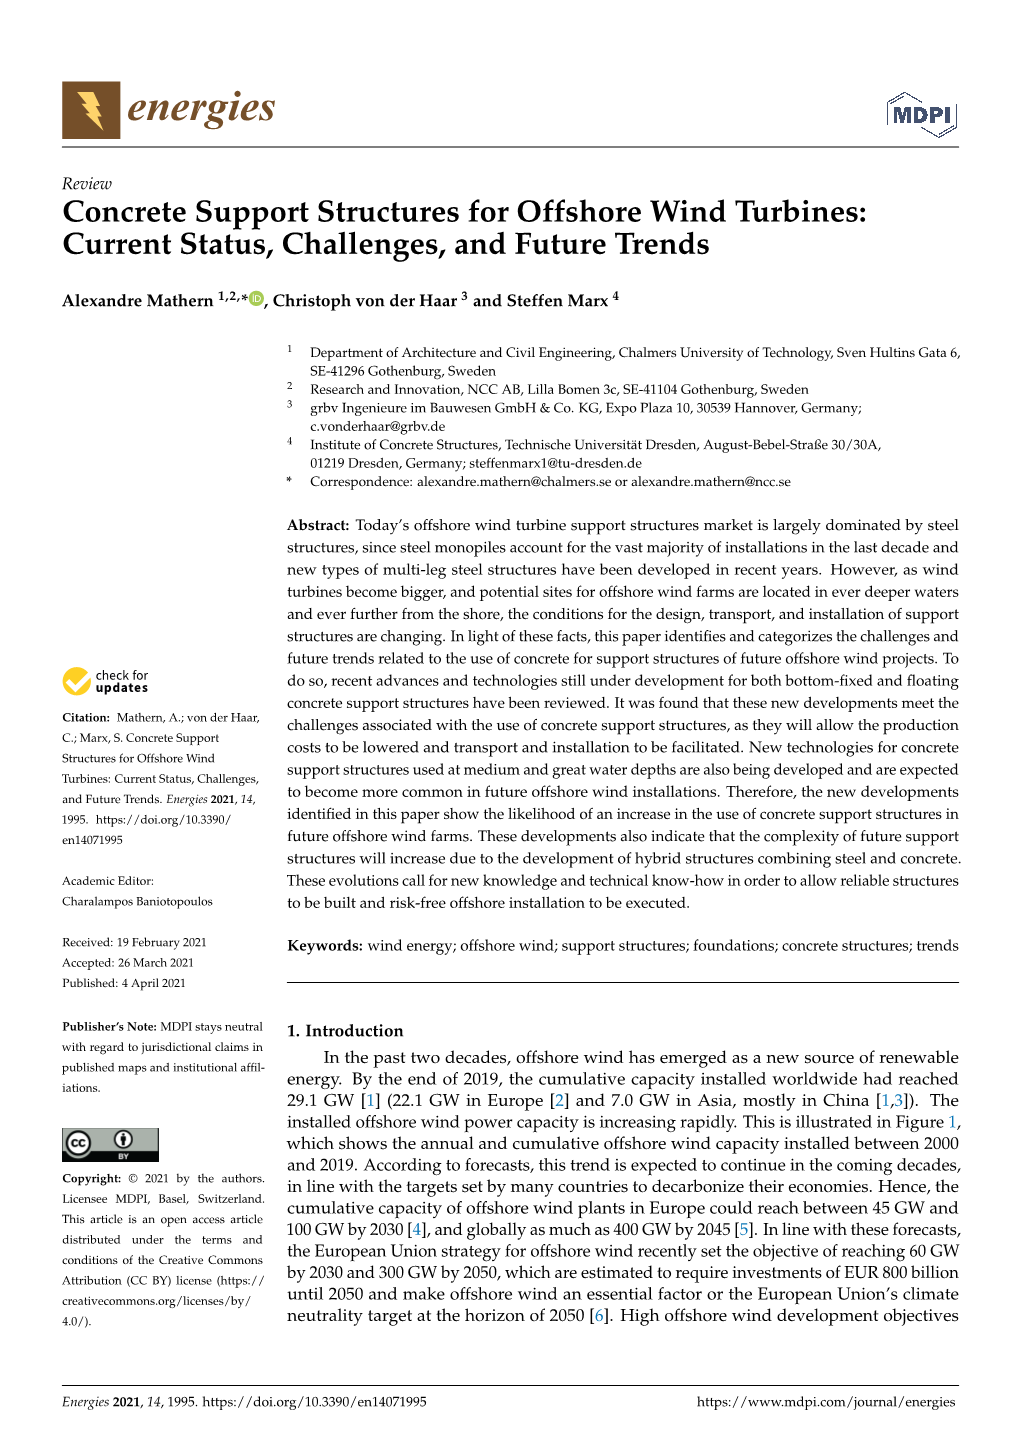 Concrete Support Structures for Offshore Wind Turbines: Current Status, Challenges, and Future Trends